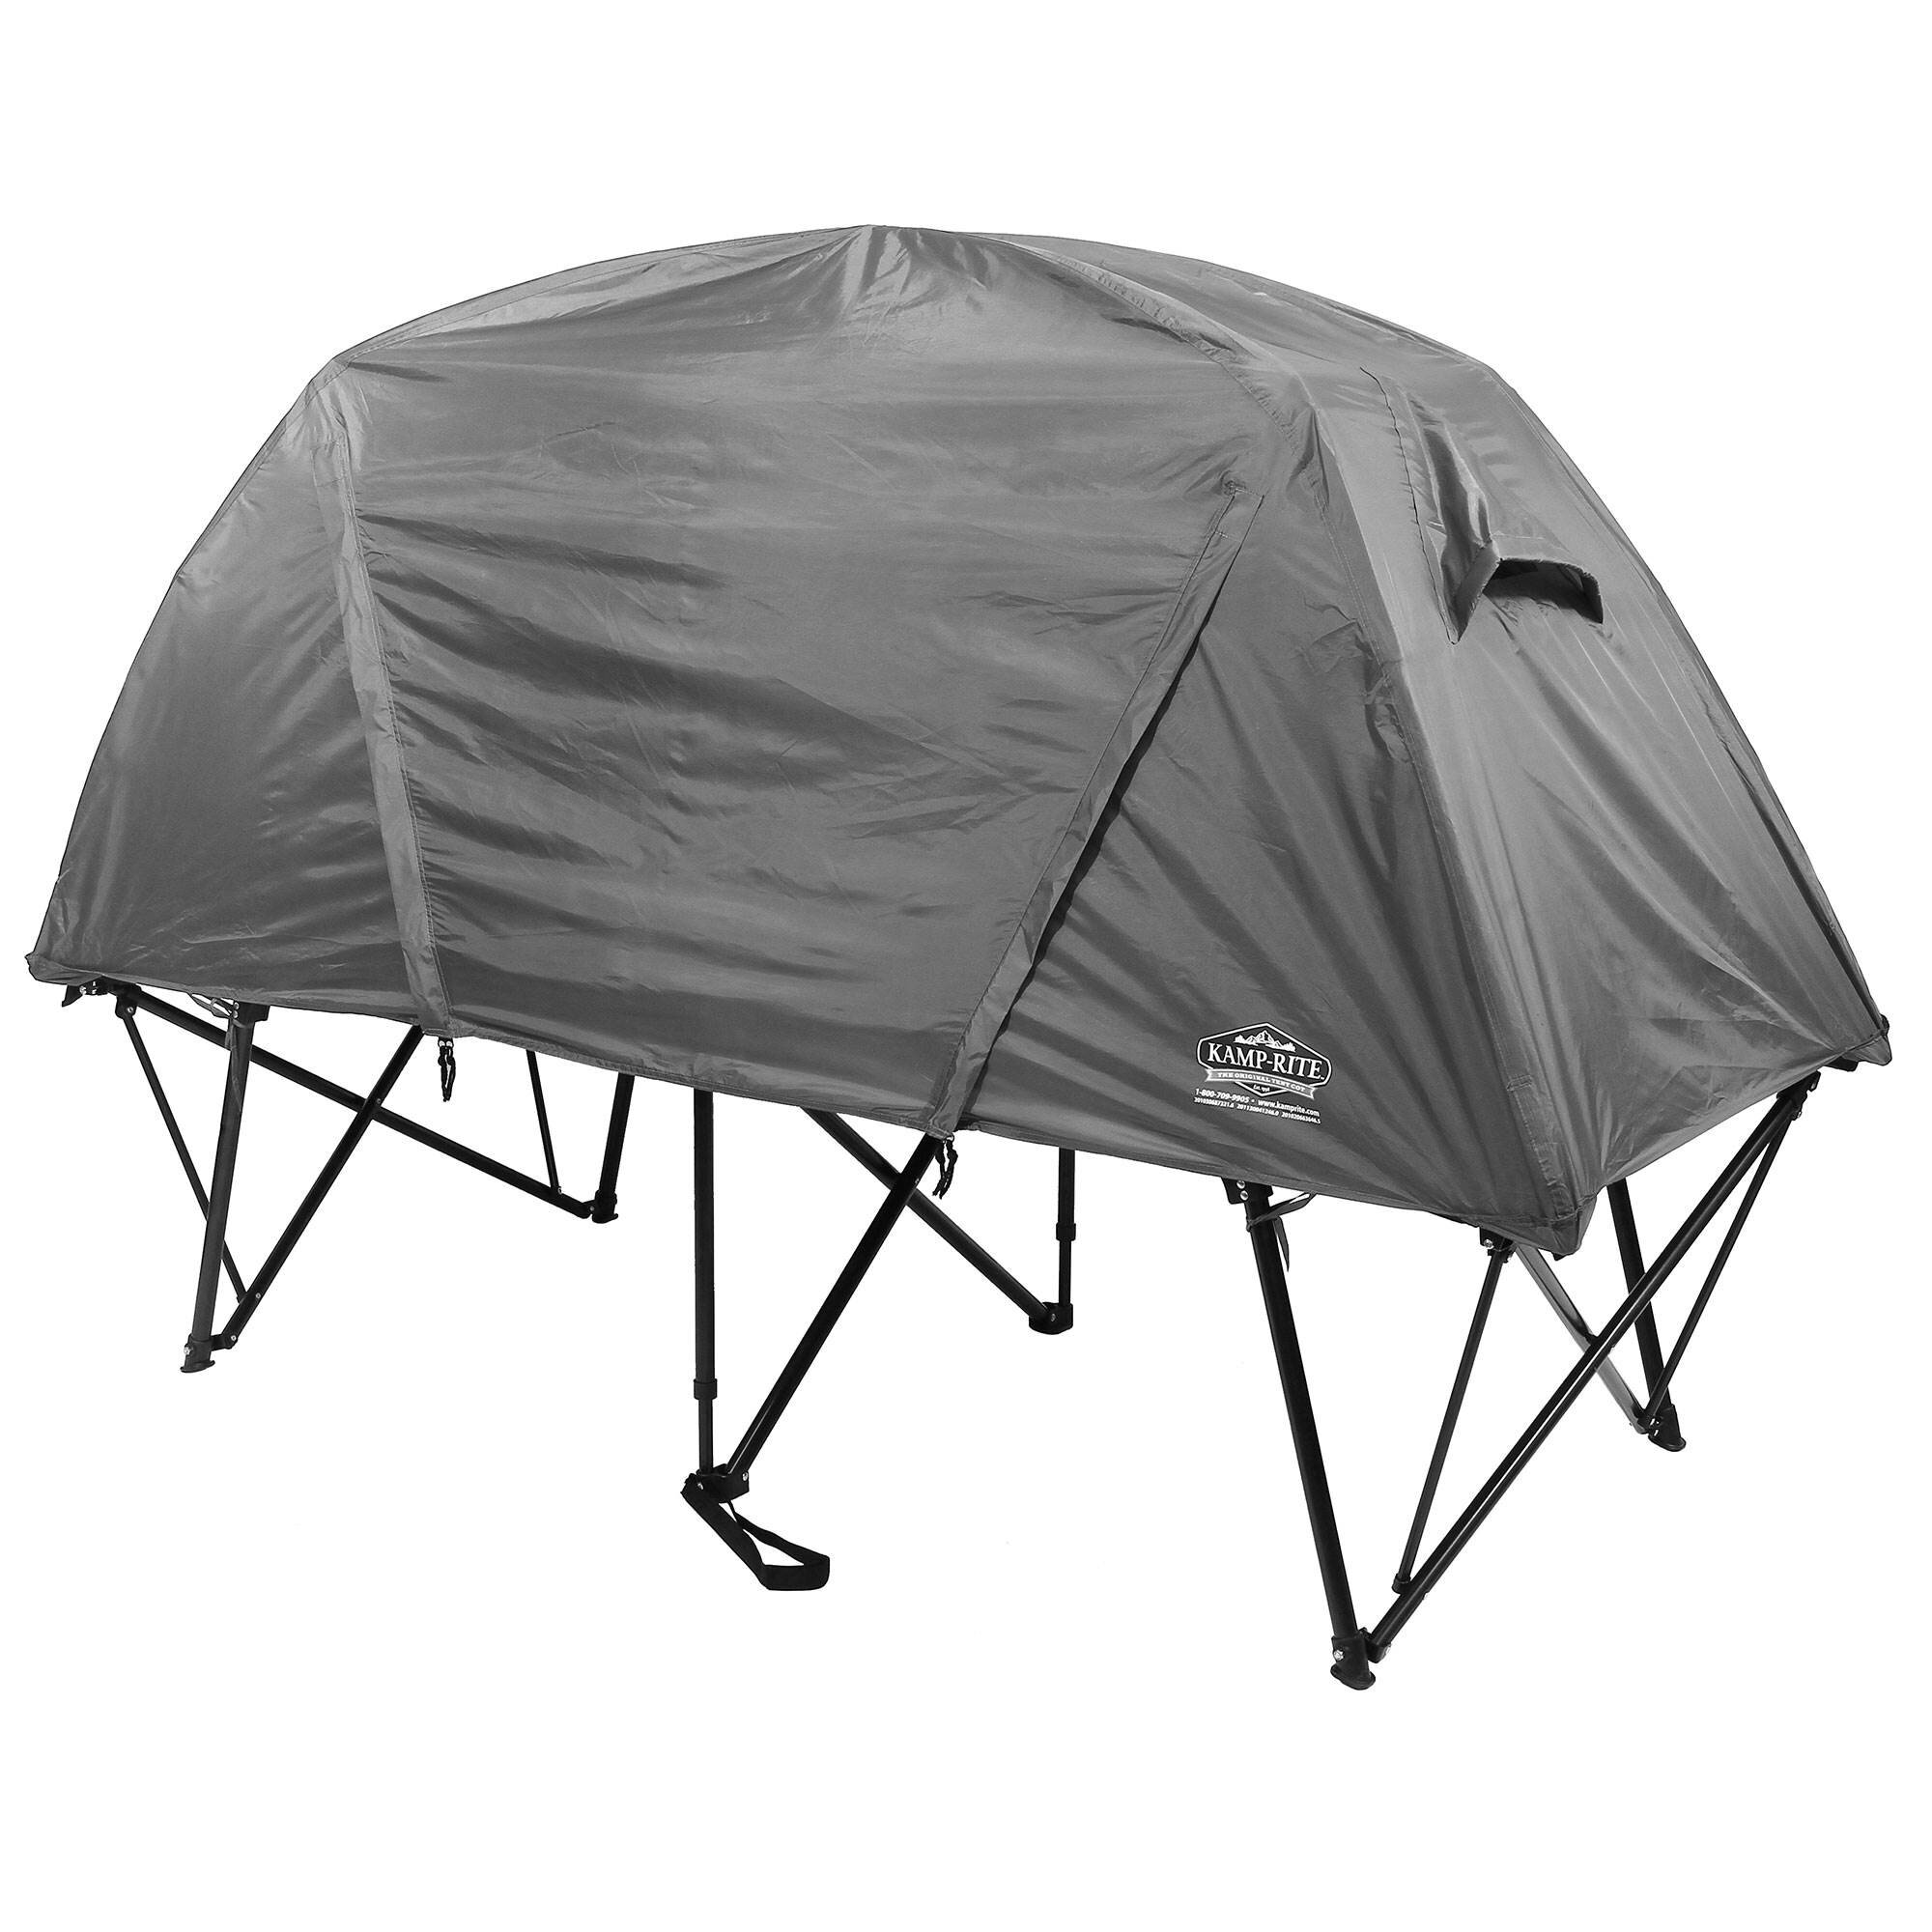 Gray Kamp Rite CTC XL Compact Light Collapsible Backpacking Camping Tent Cot 